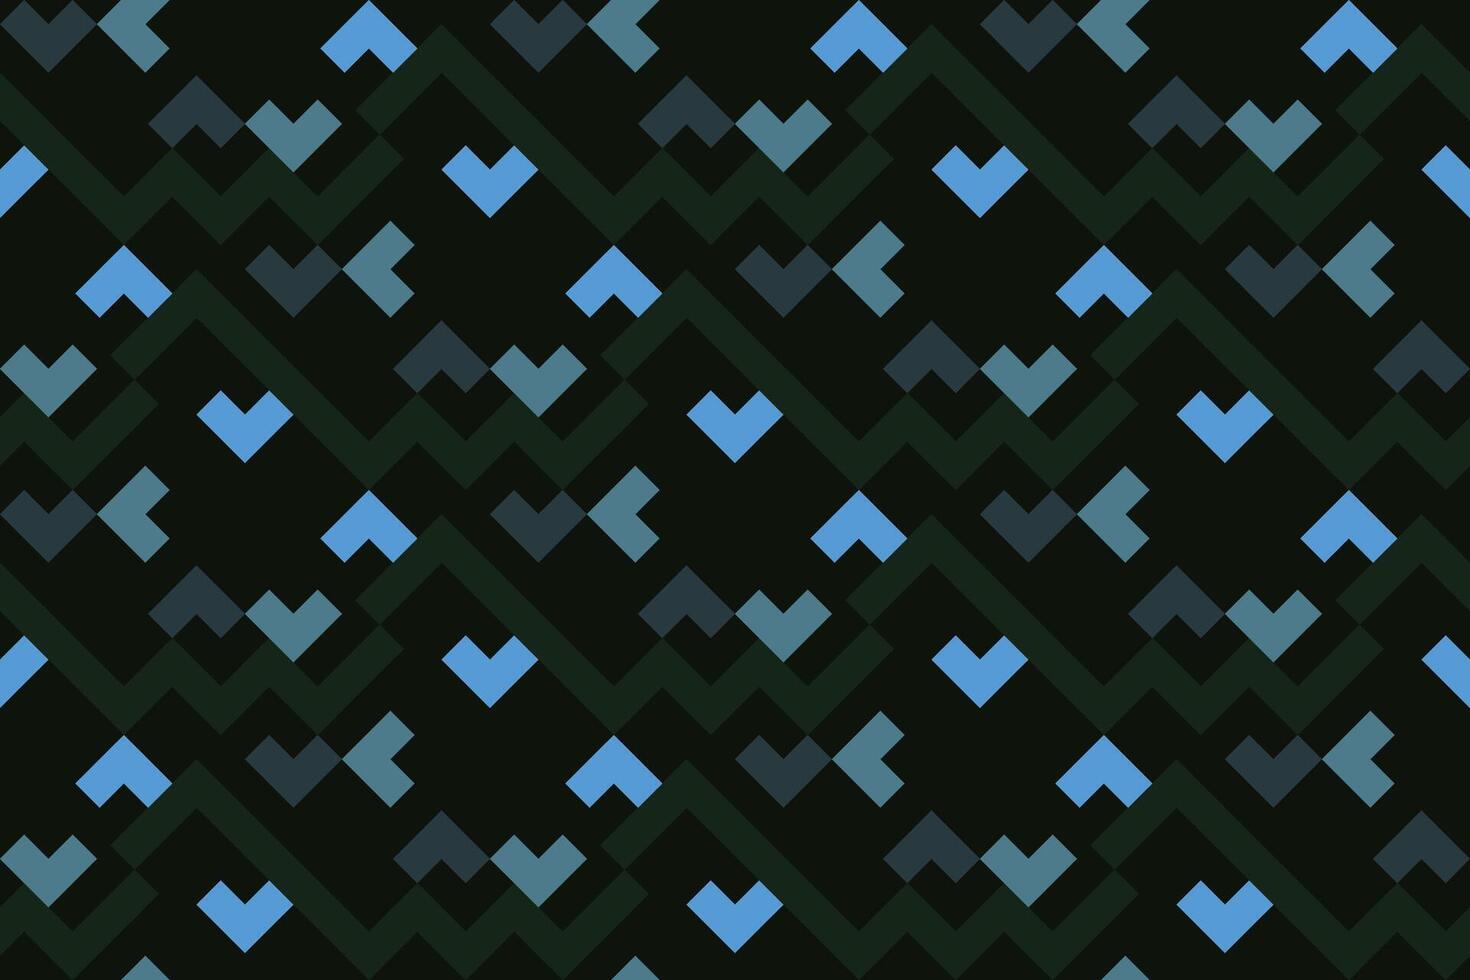 geometric seamless pattern background with black and blue color vector